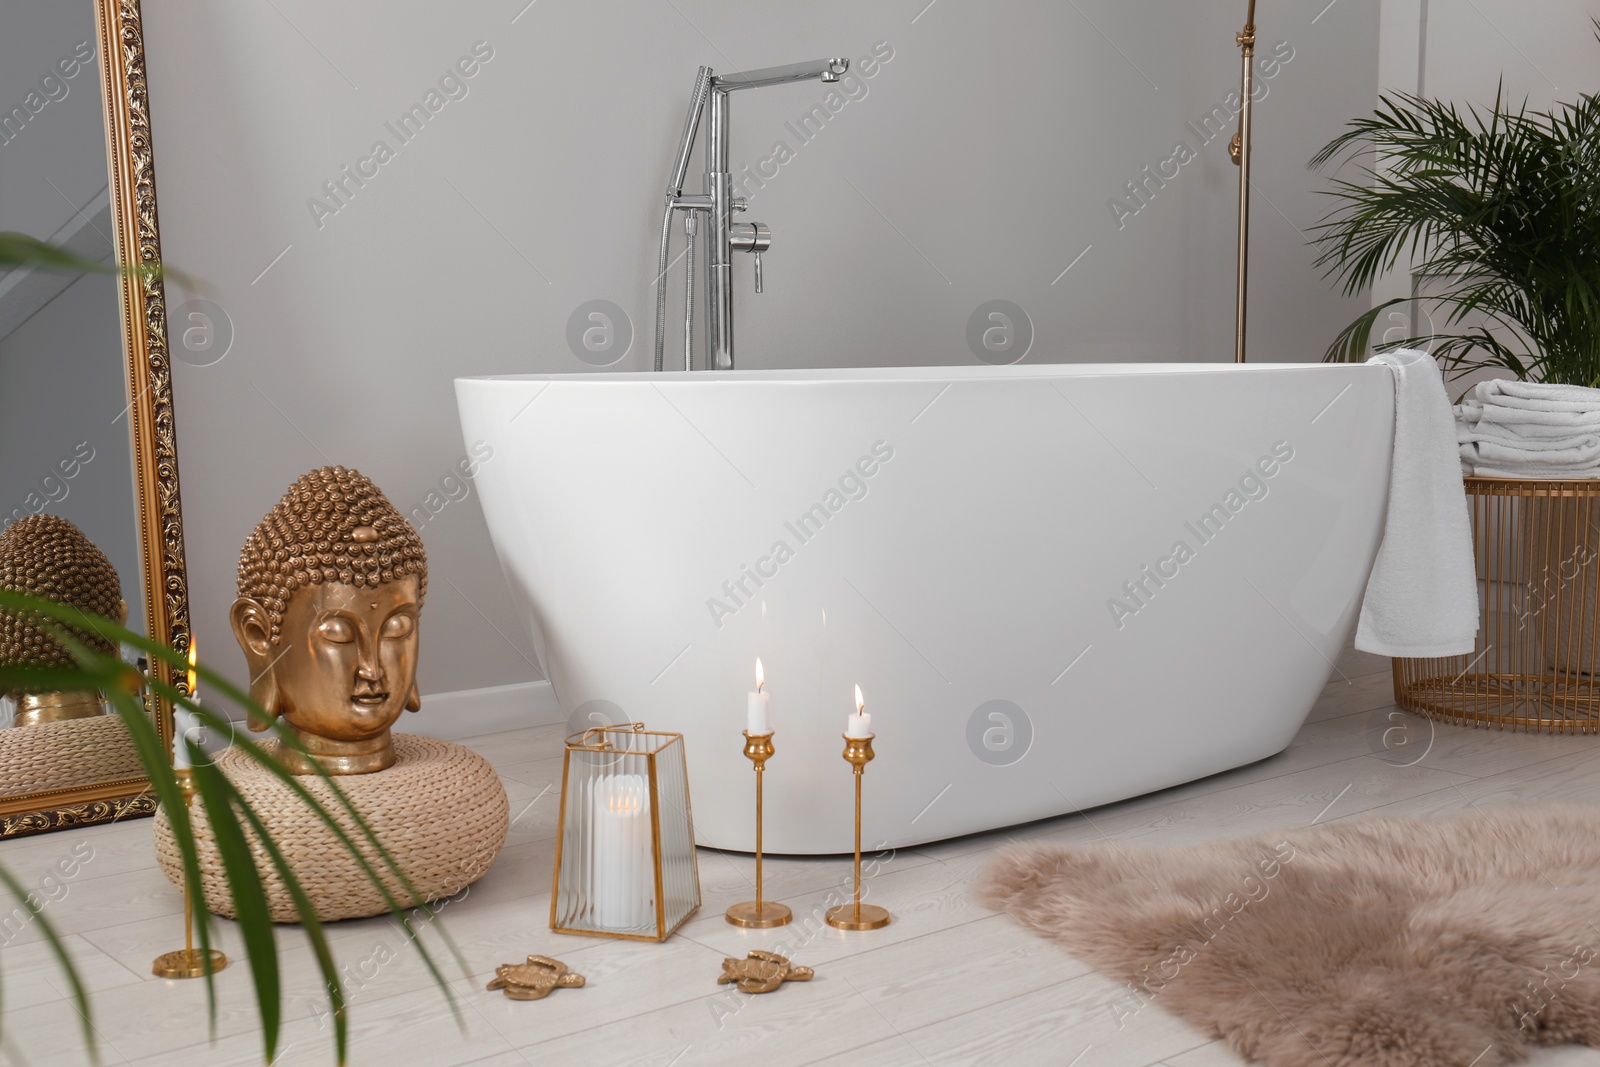 Photo of Bathroom interior with golden Buddha sculpture and modern white tub